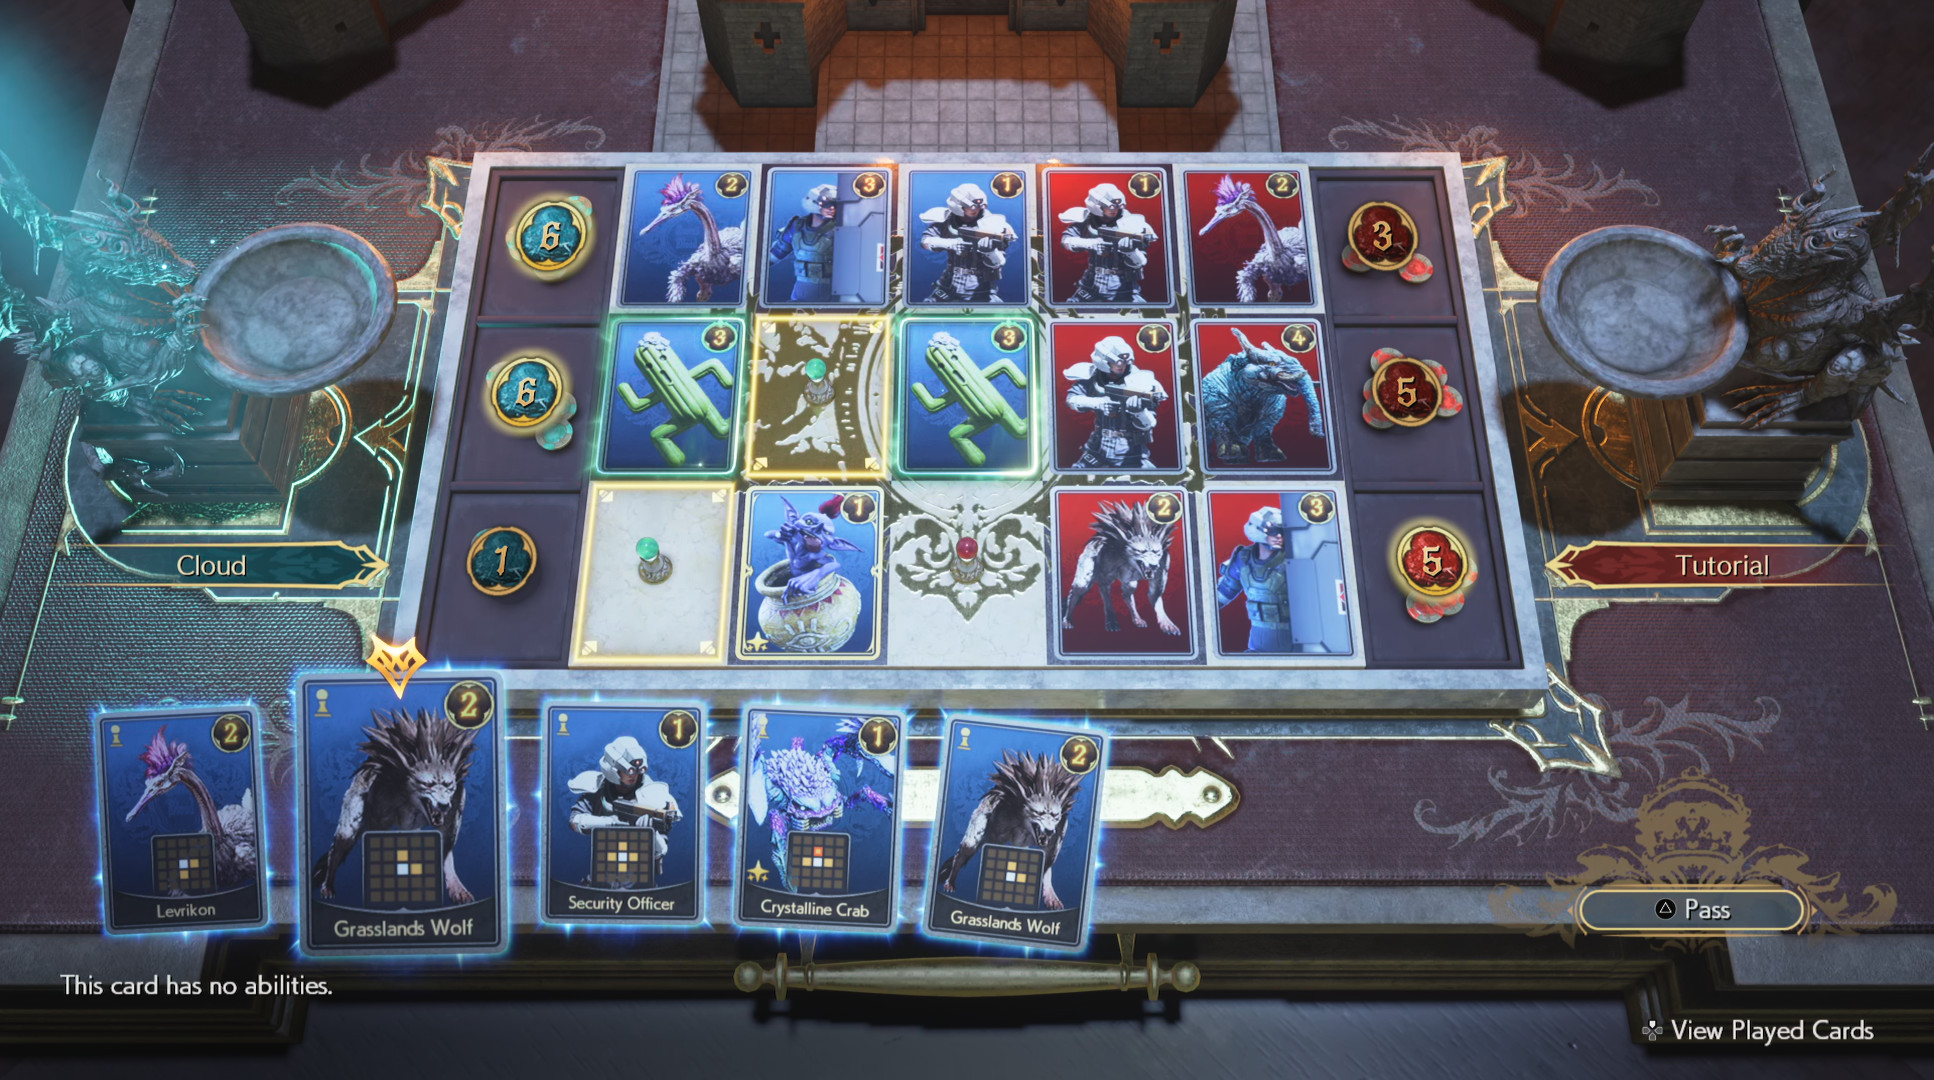 Cards featuring Final Fantasy monsters are laid out on tiles board in the card game Queen’s Blood in Final Fantasy 7: Rebirth